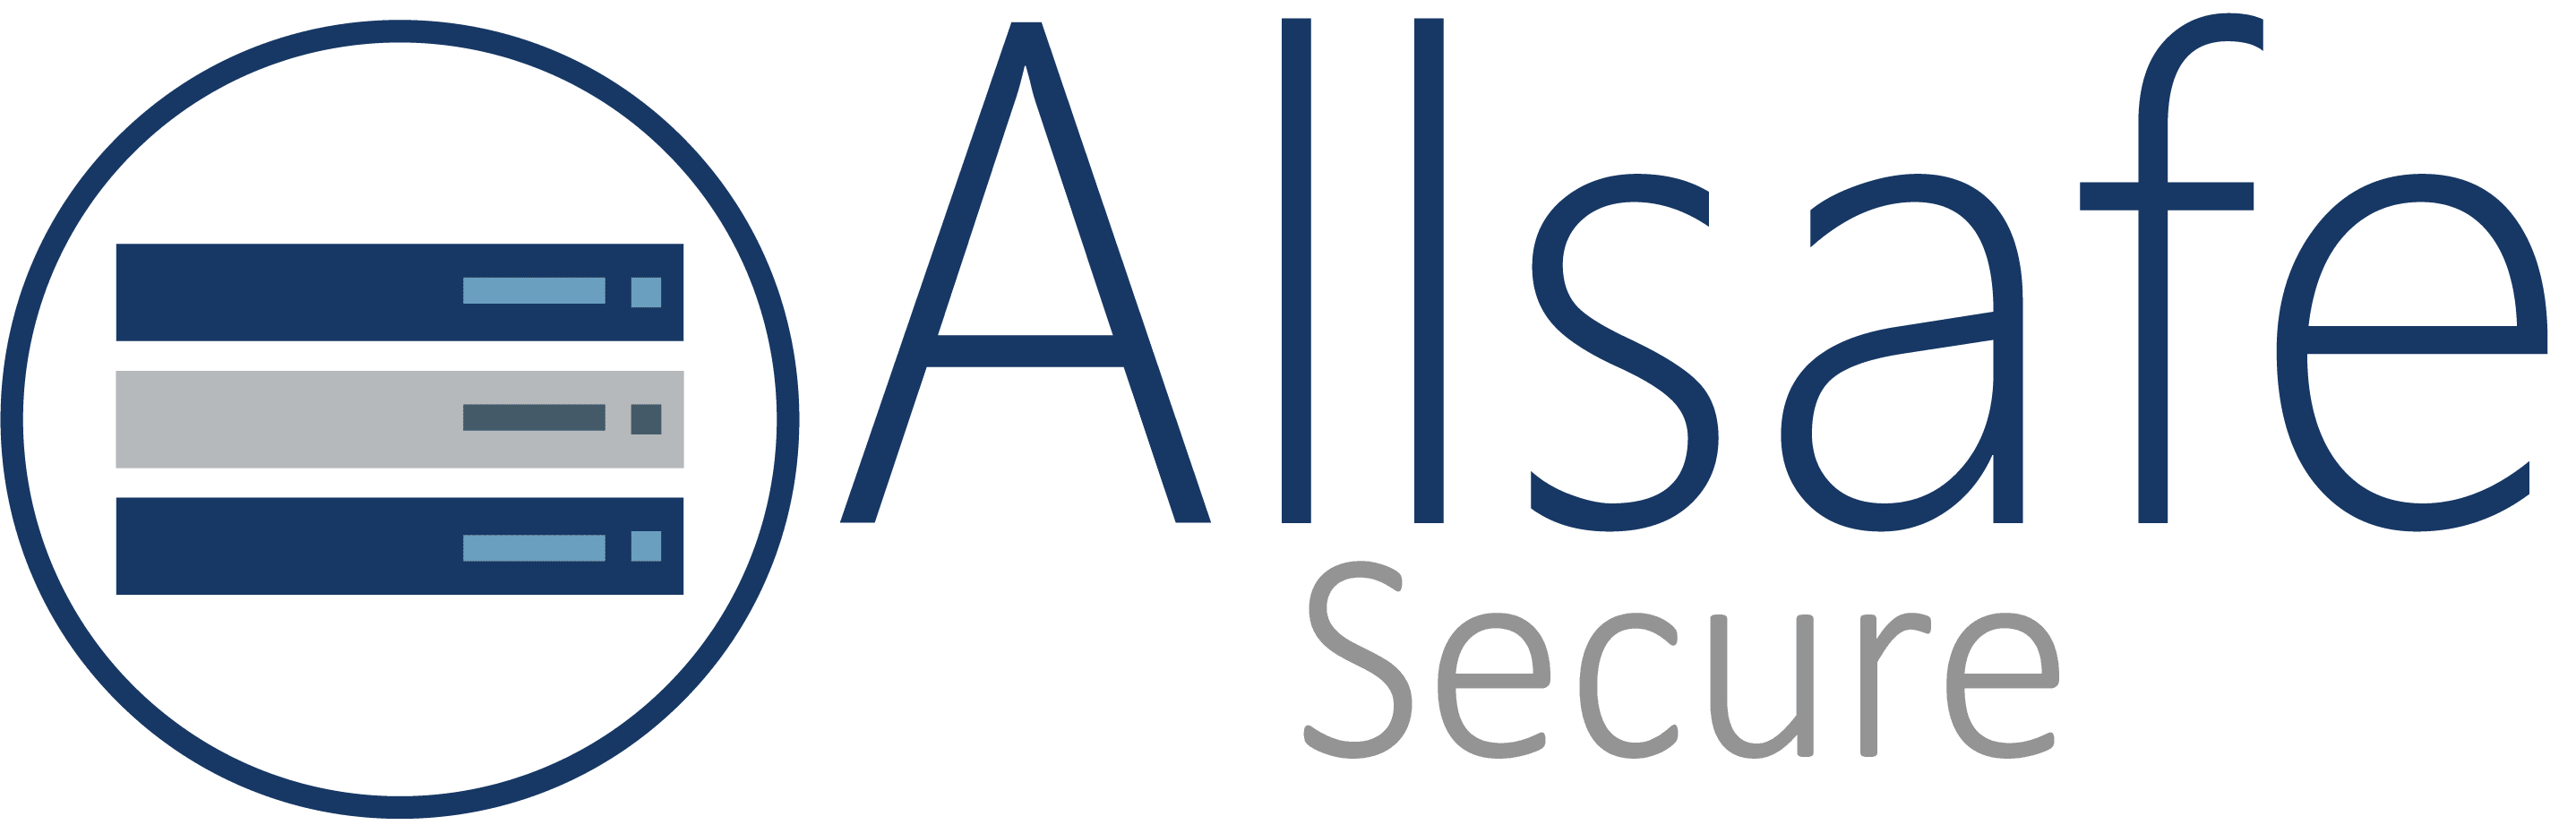 Allsafesecure